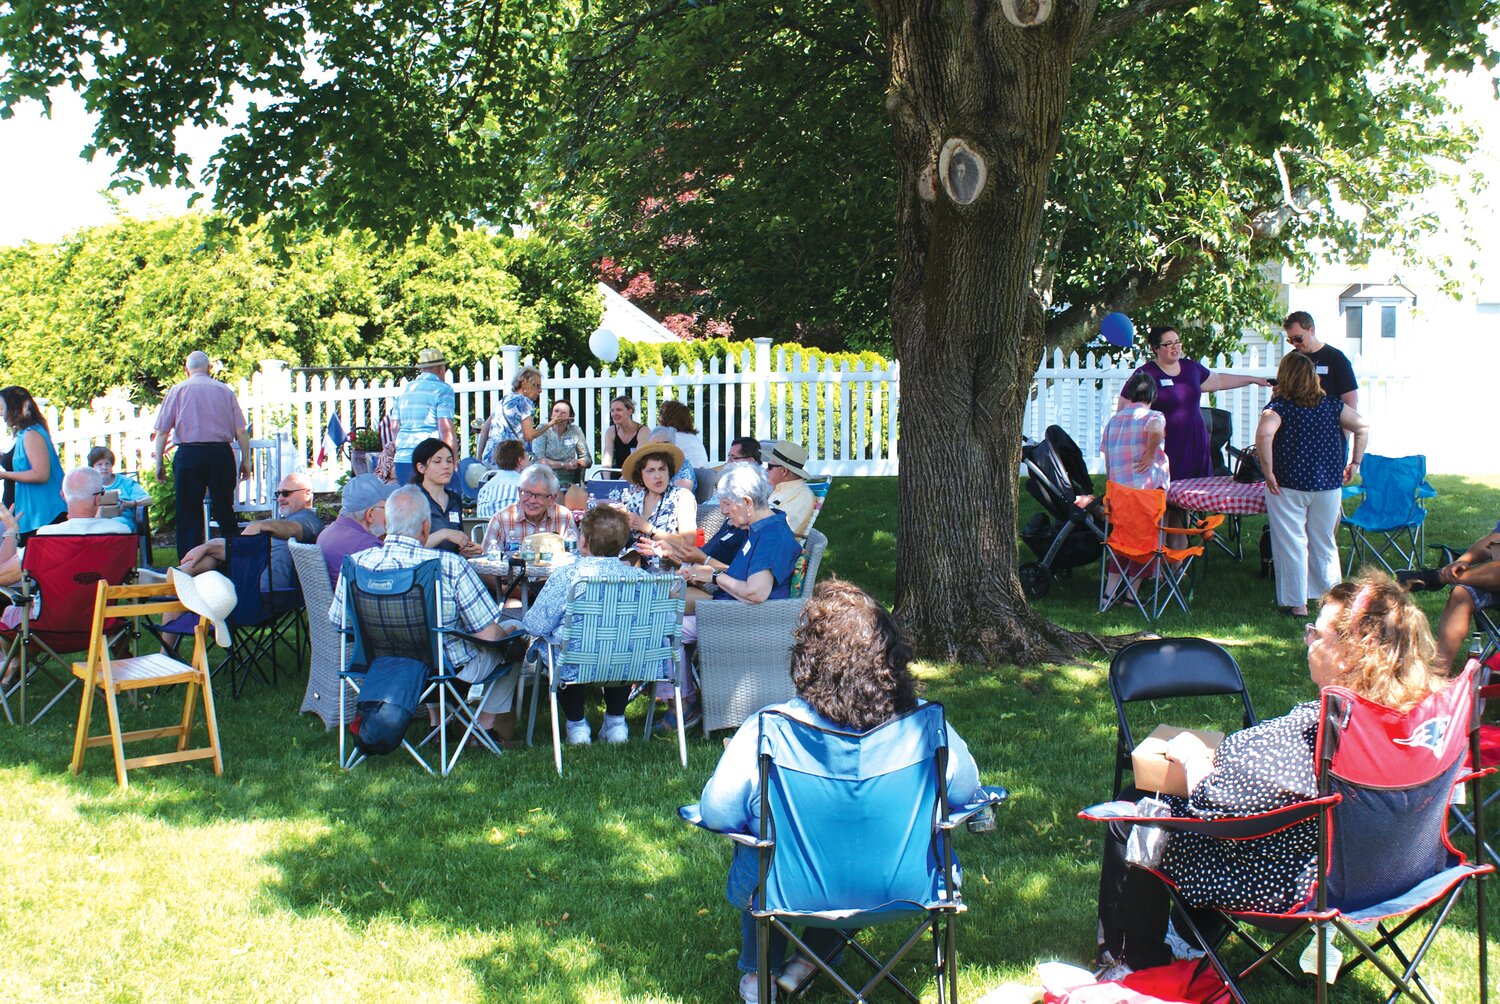 IT’S A PICNIC: Supportive friends, neighbors and family happily join together to greet their guests from France.  X